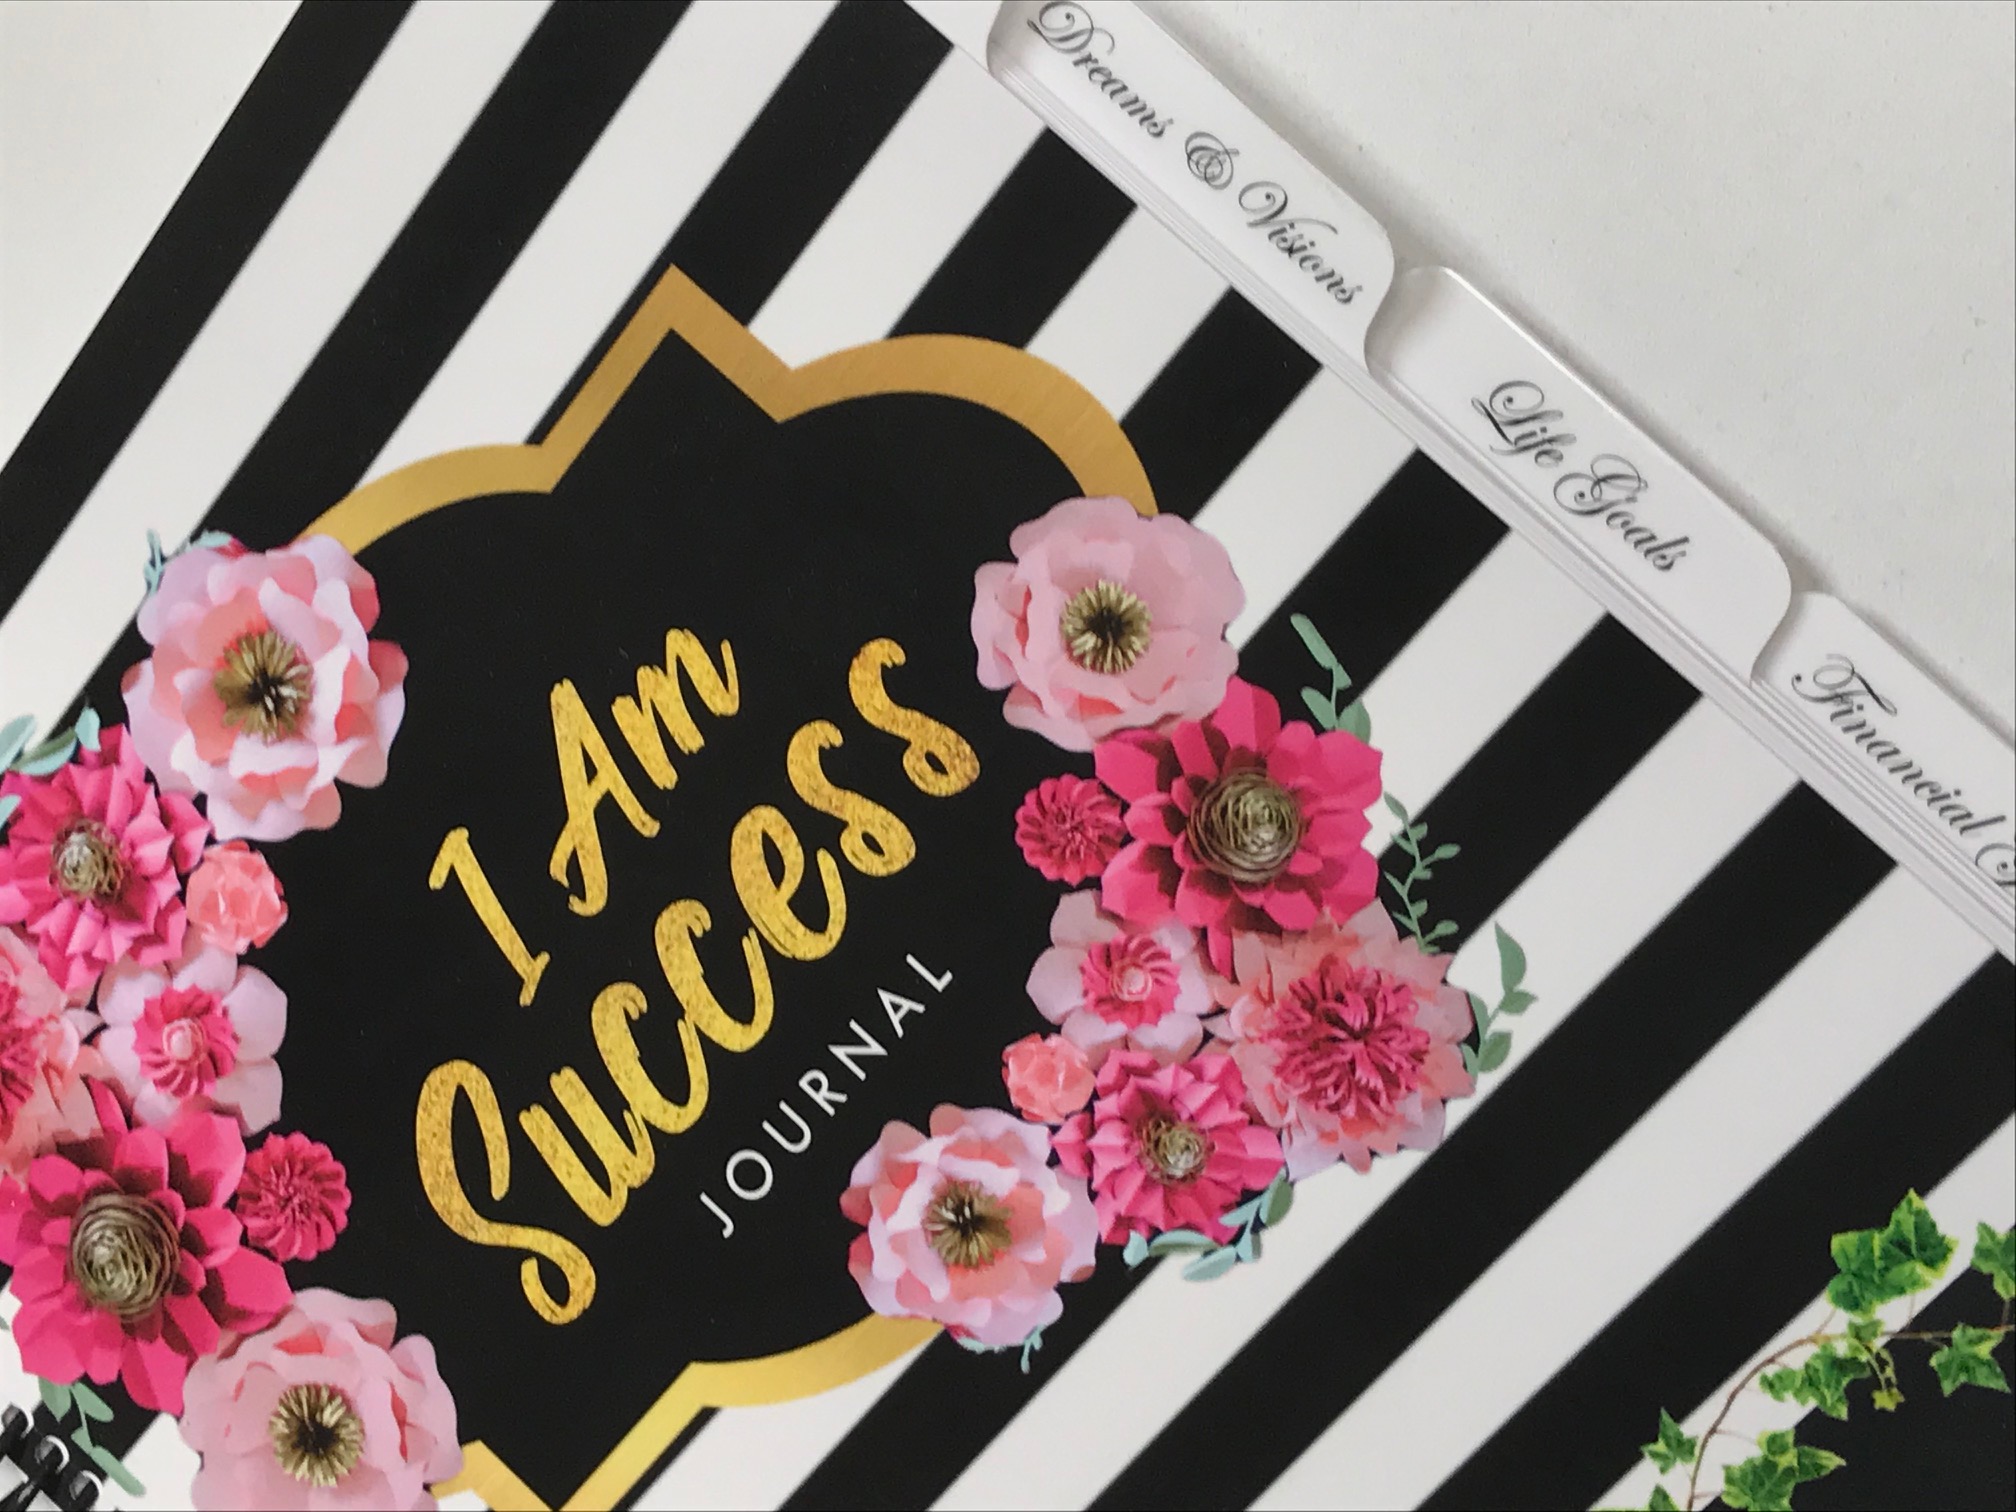 "I Am Success Journal" with white book tabs